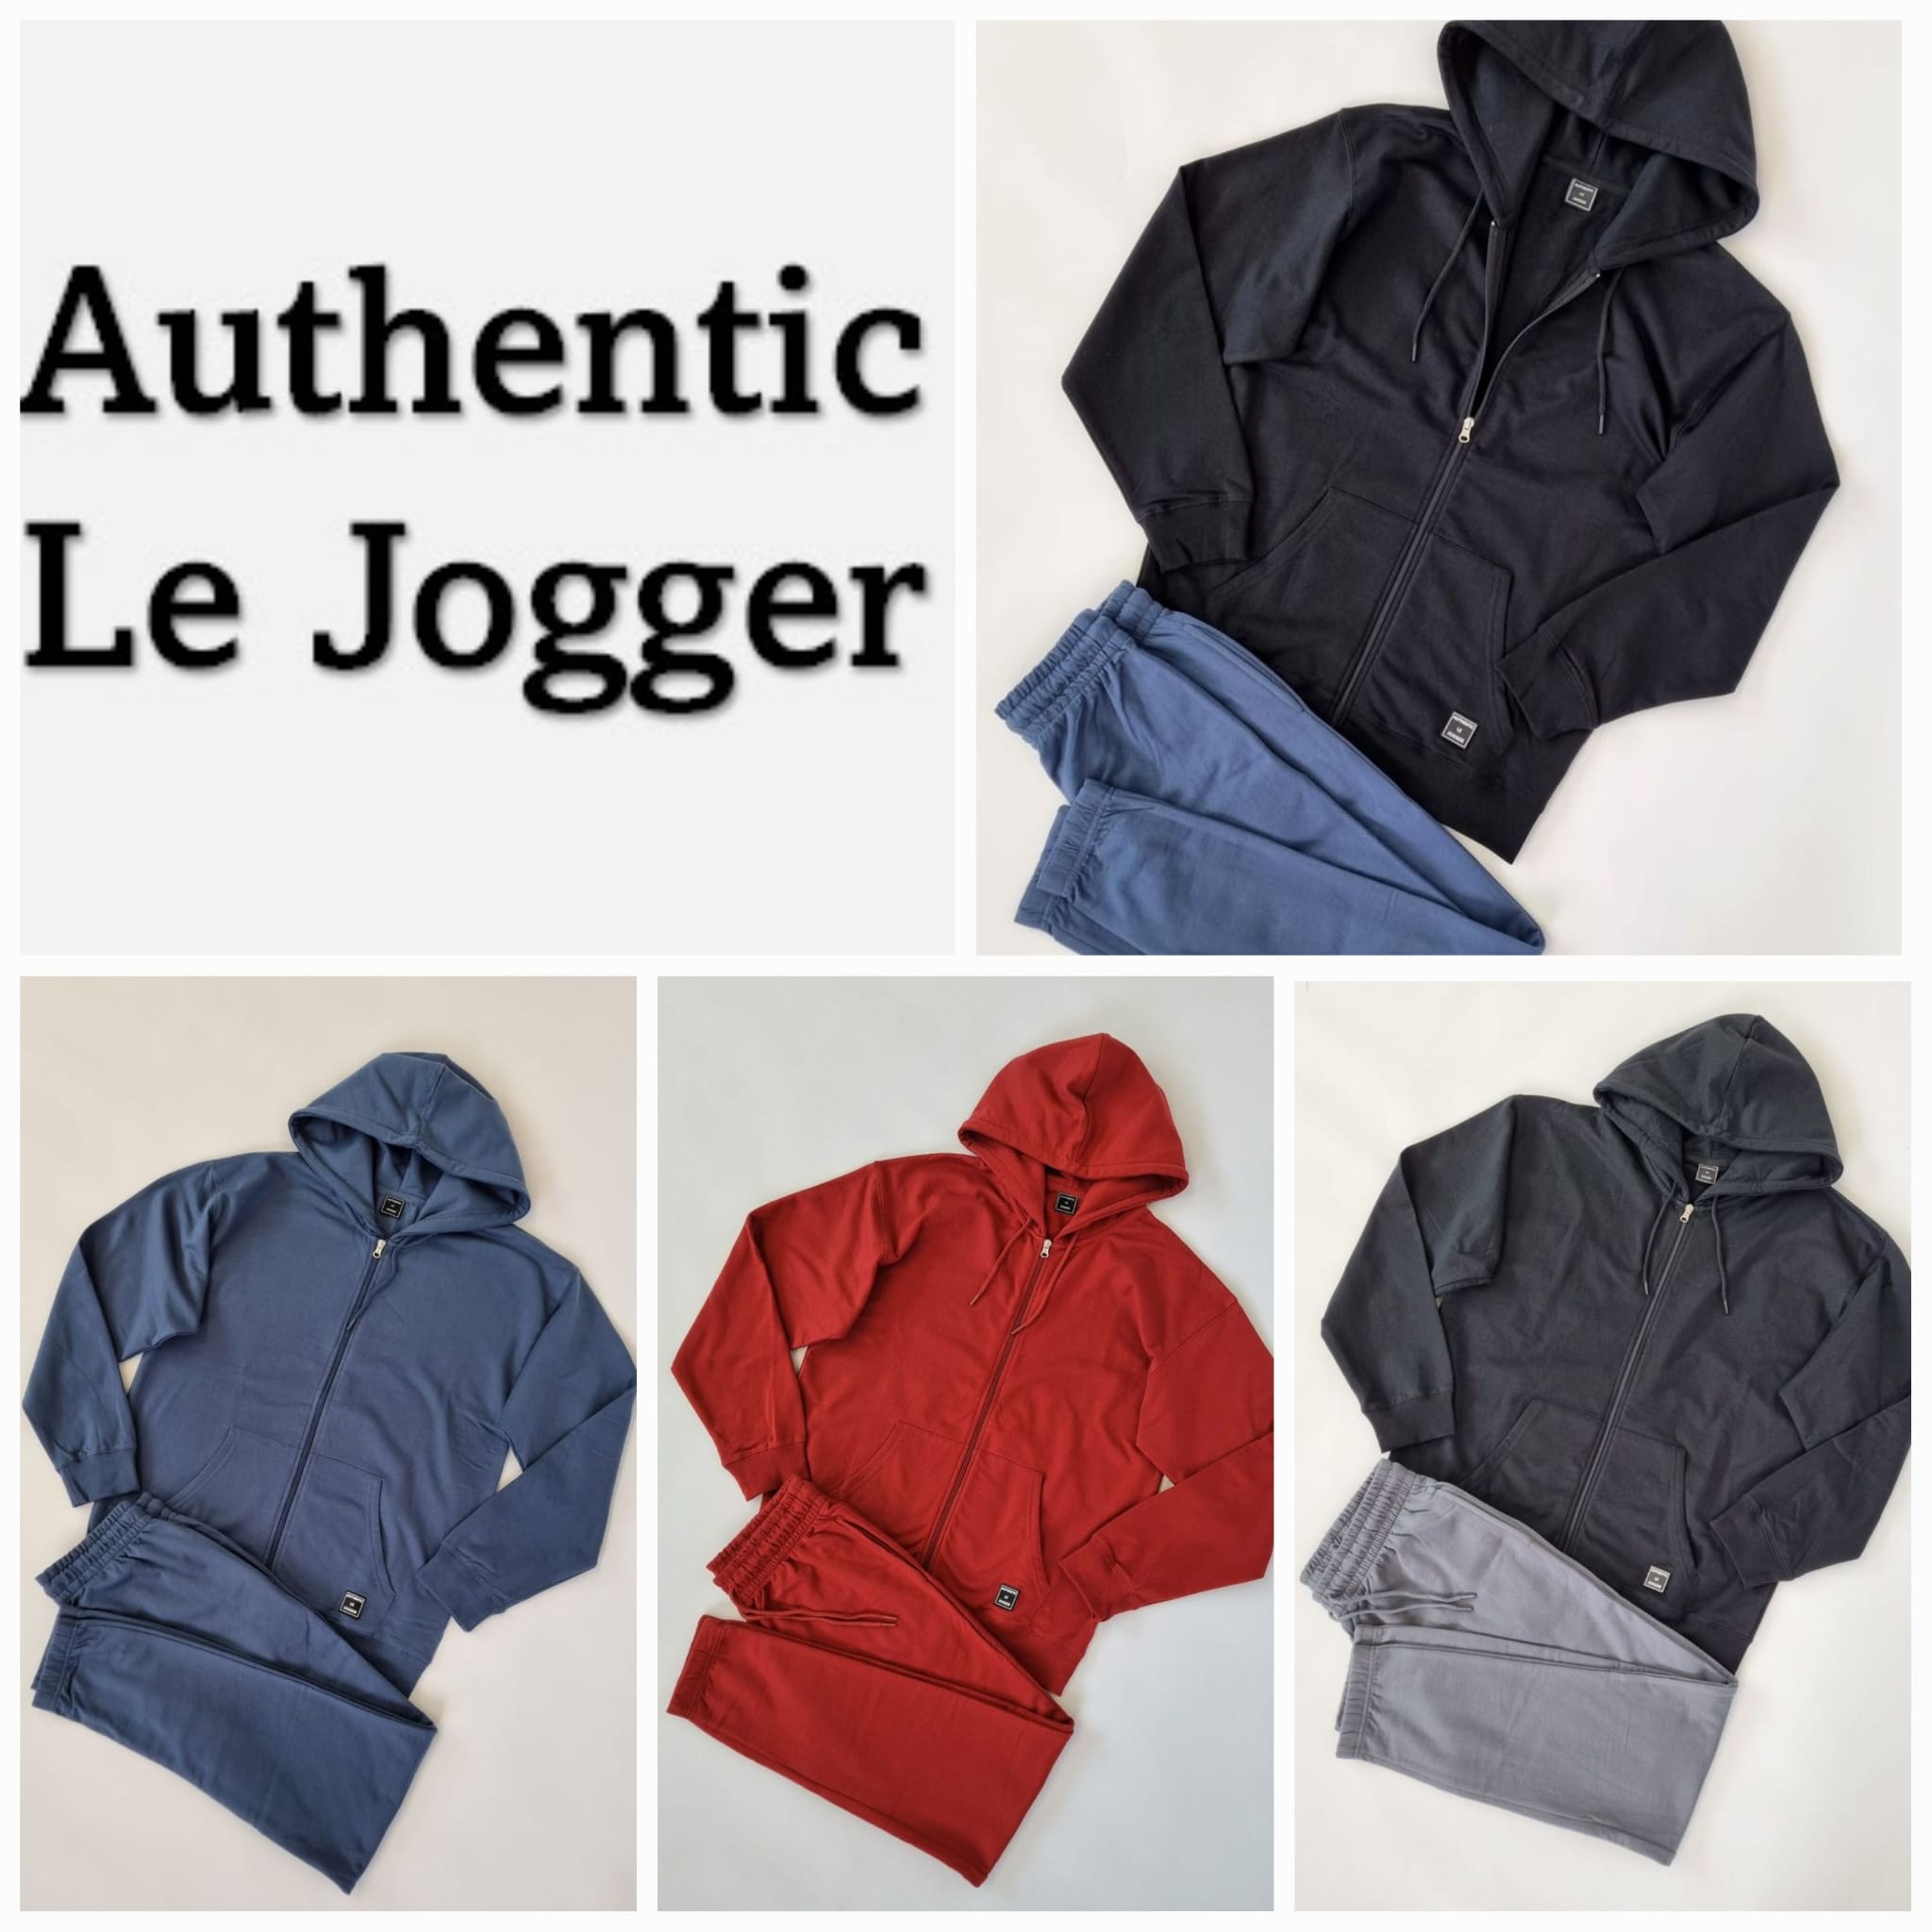 Men's tracksuits from Authentic Le Jogger